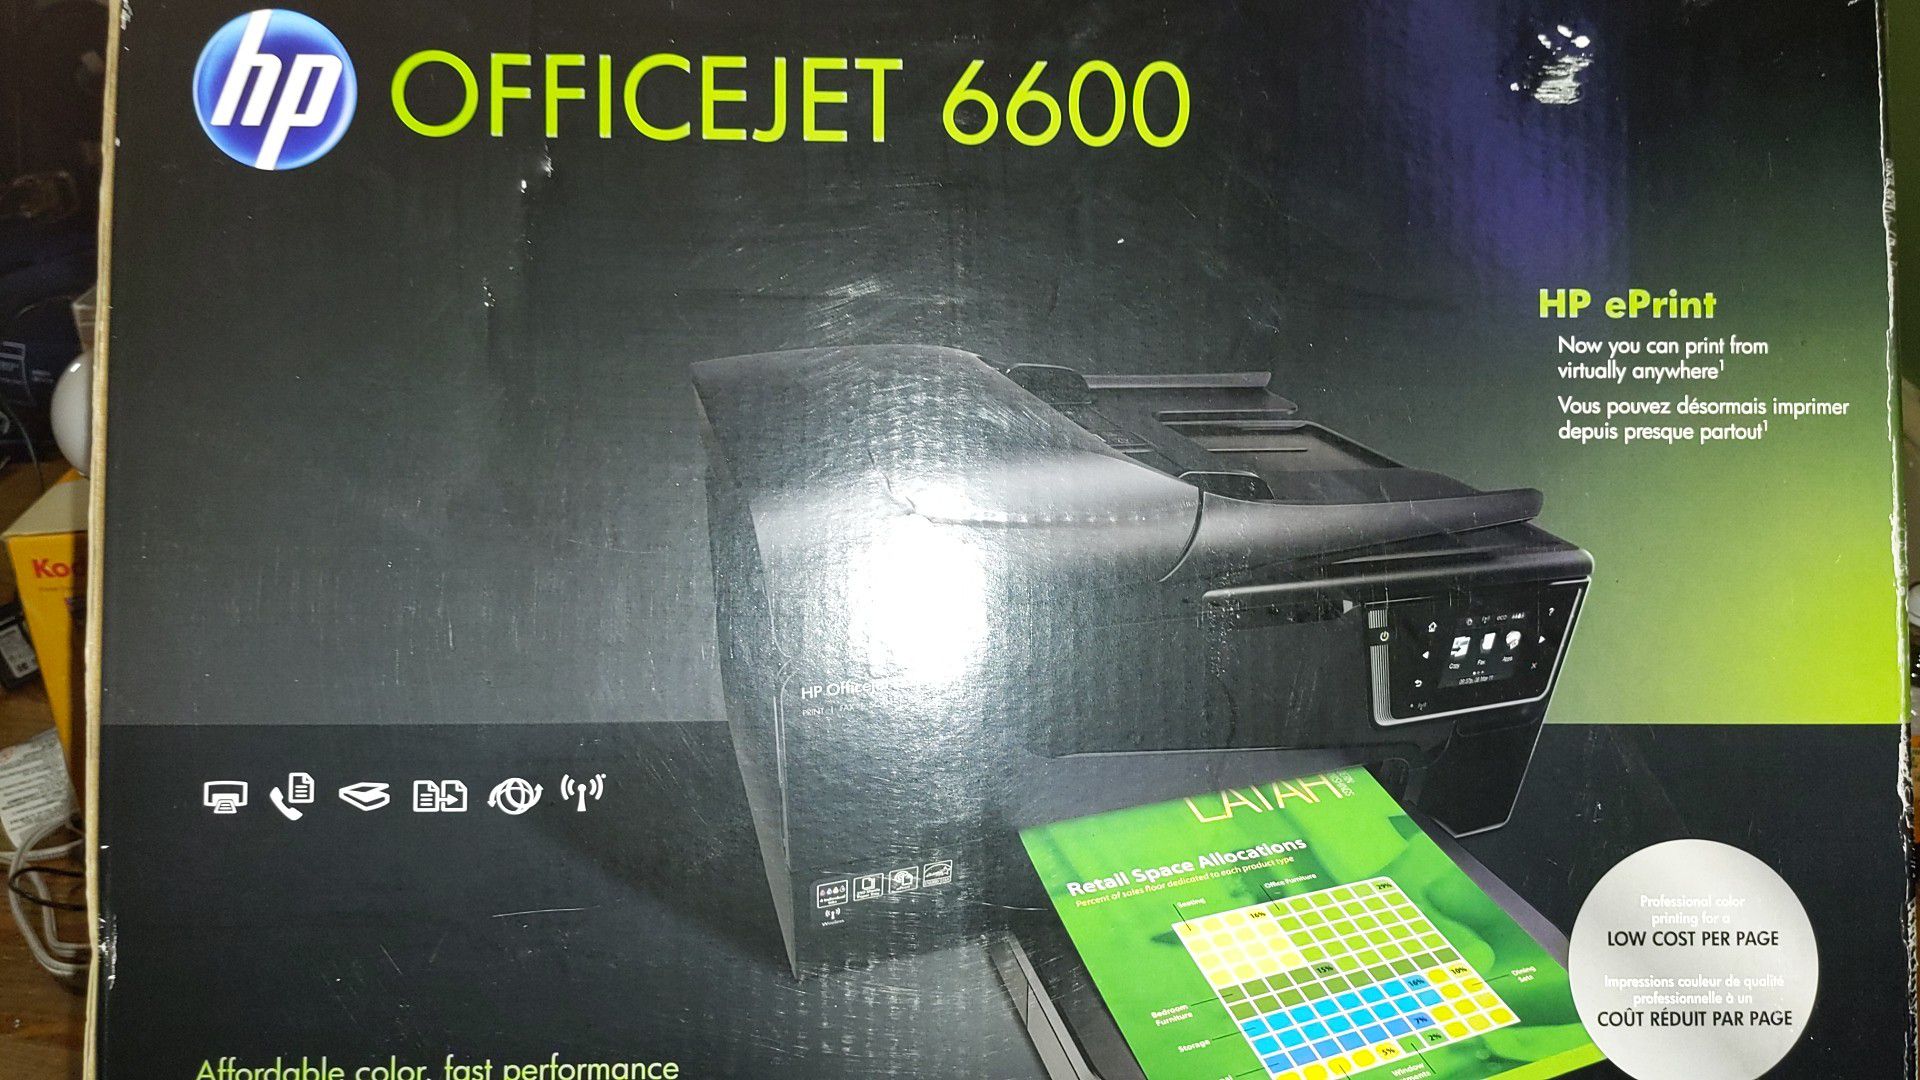 HP officejet 6600 new in the box